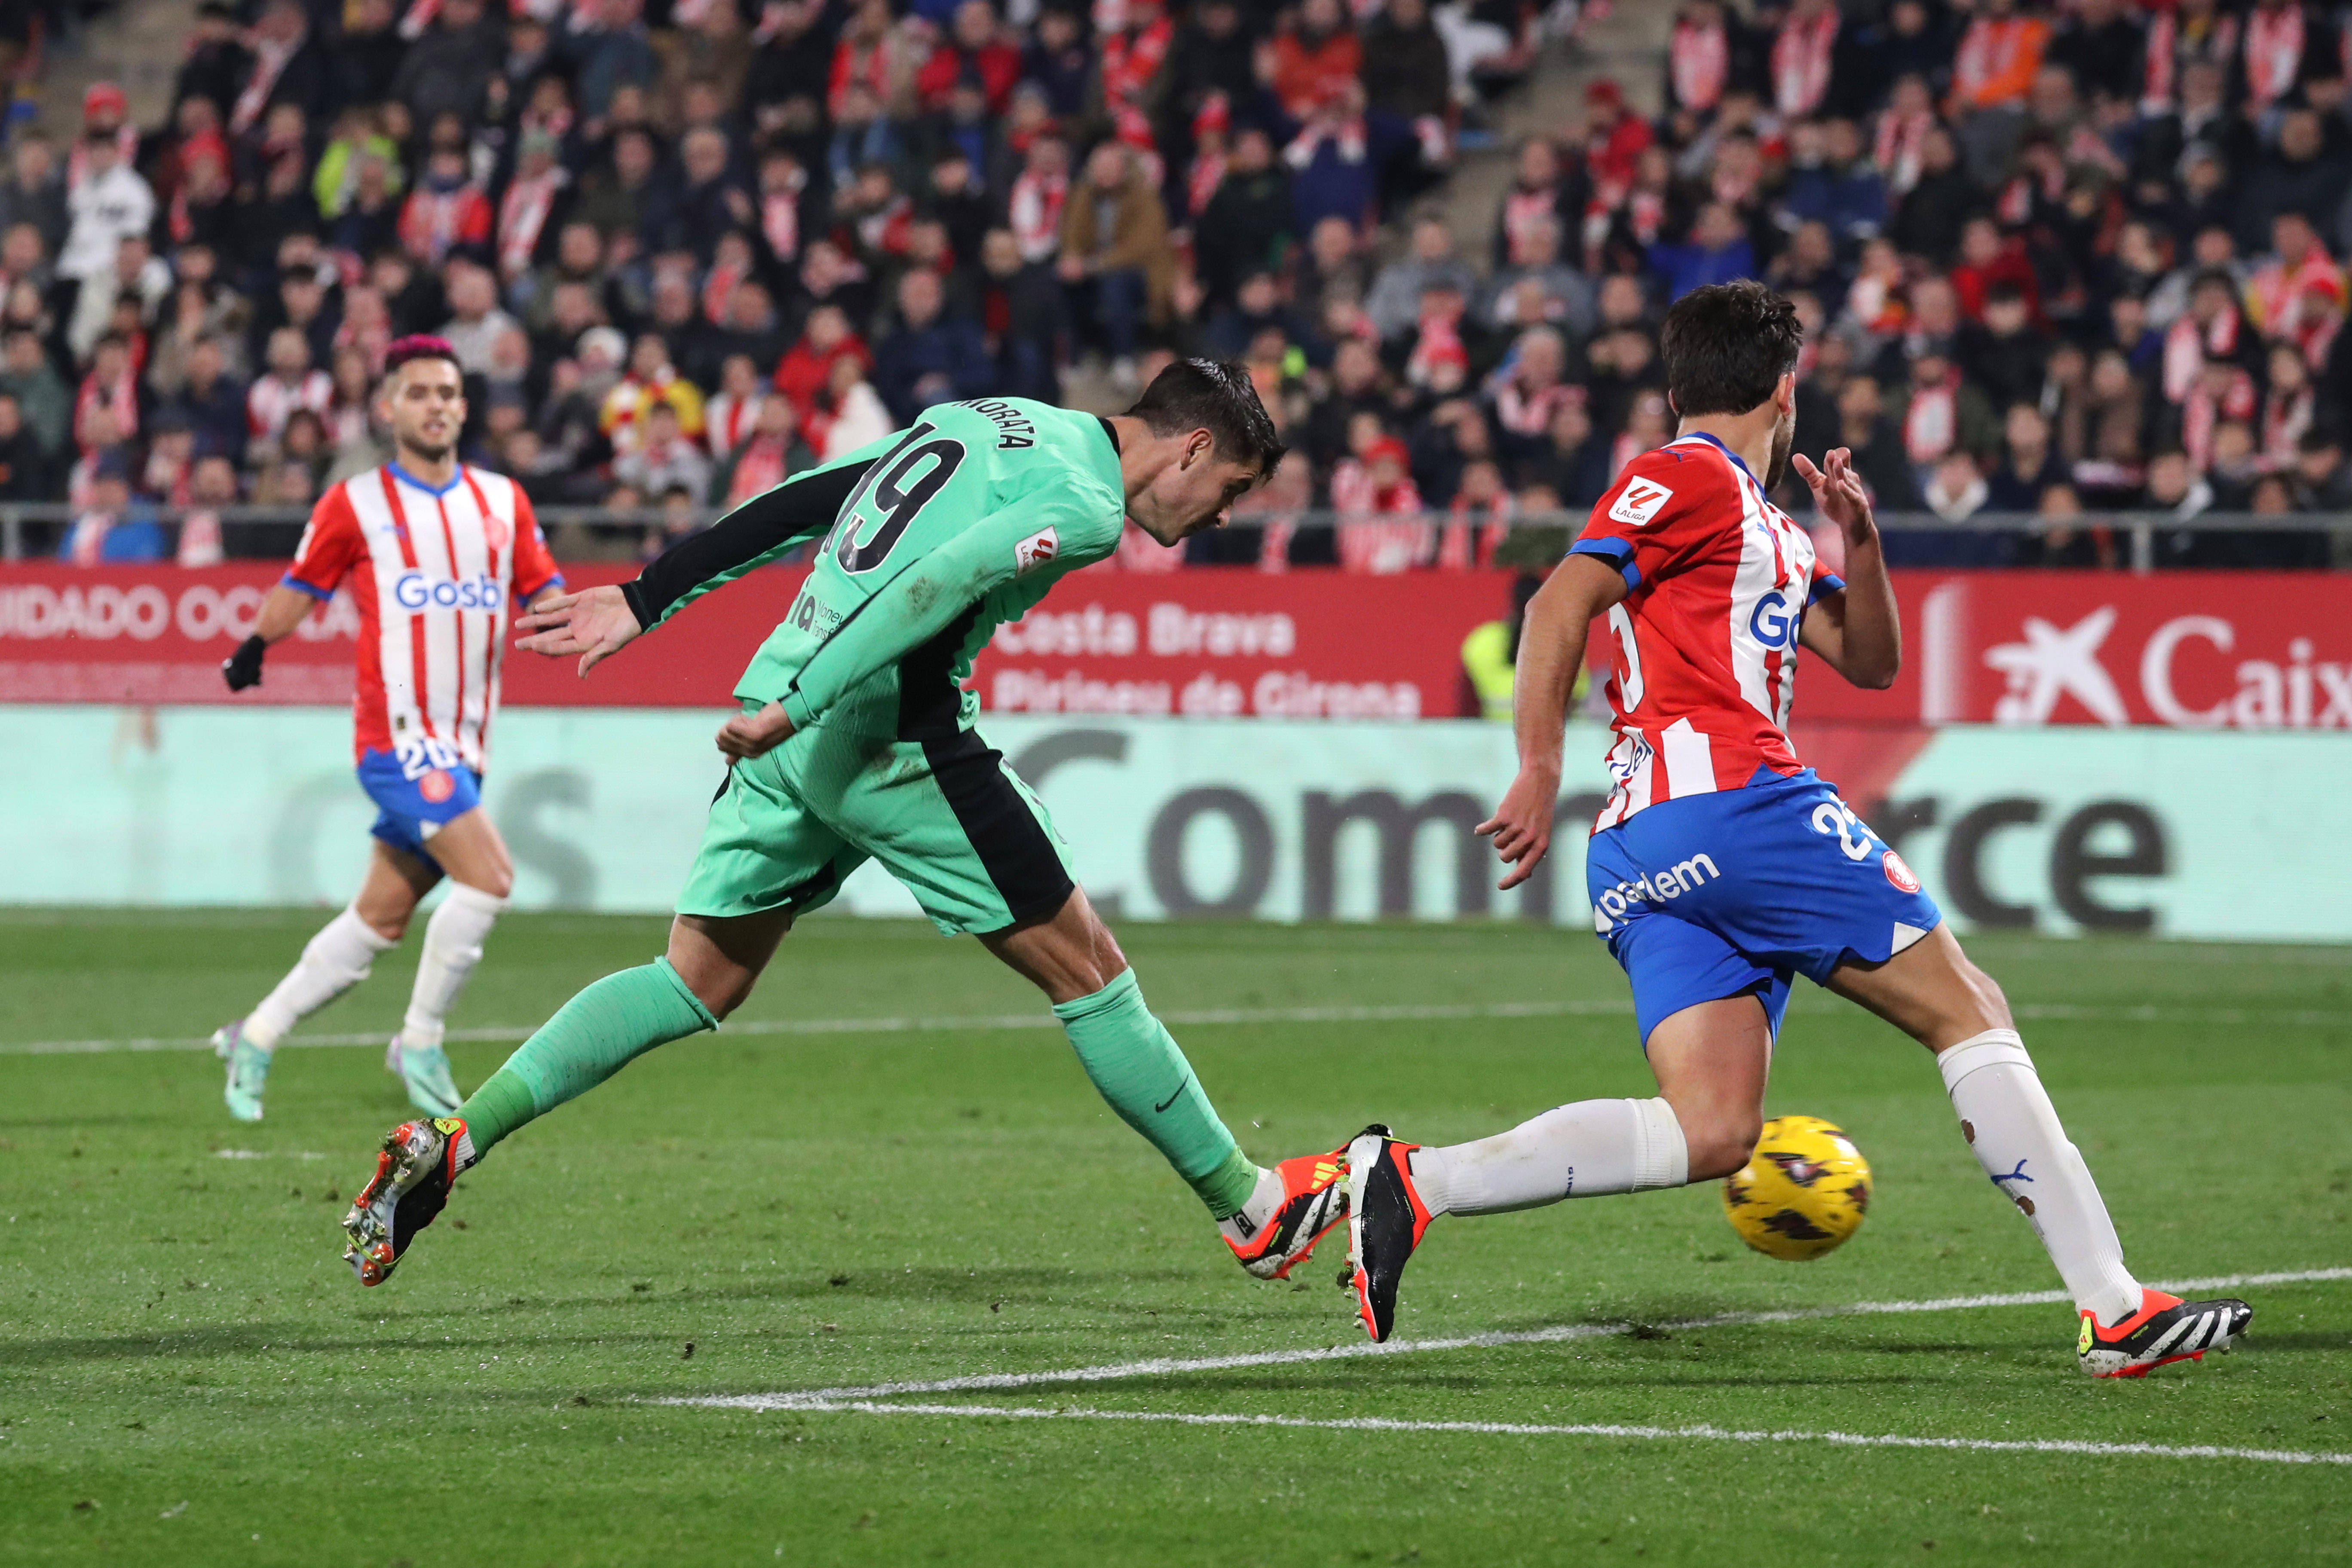 Alvaro Morata pictured (center) scoring a goal for Atletico Madrid during a 4-3 loss at Girona in January 2024